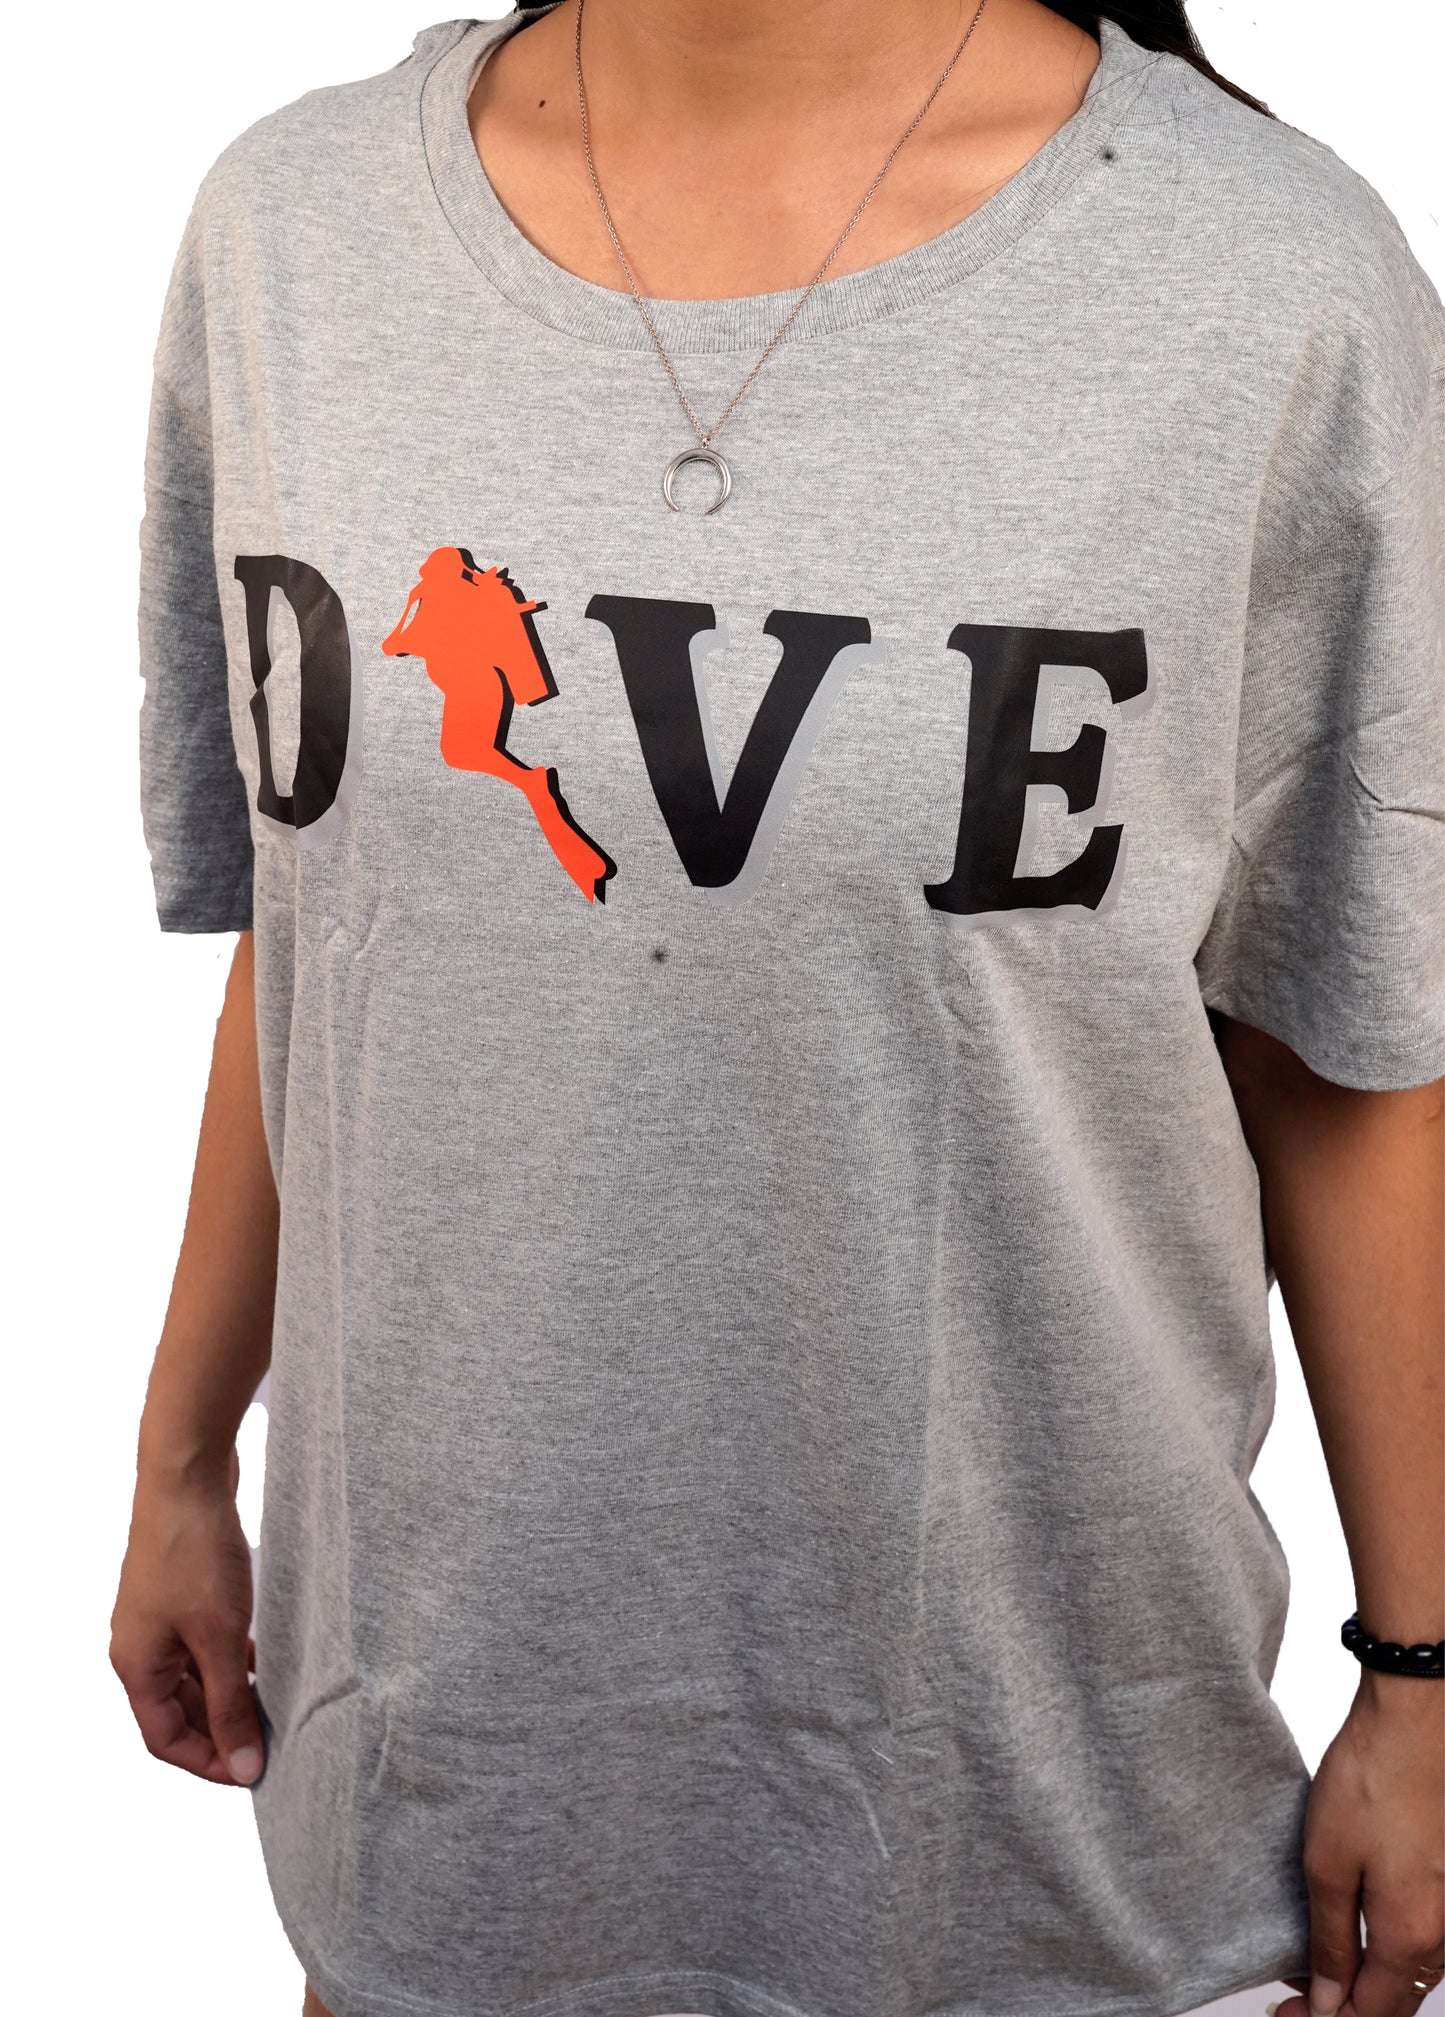 Dive Printed T-Shirt In Grey Color For Women